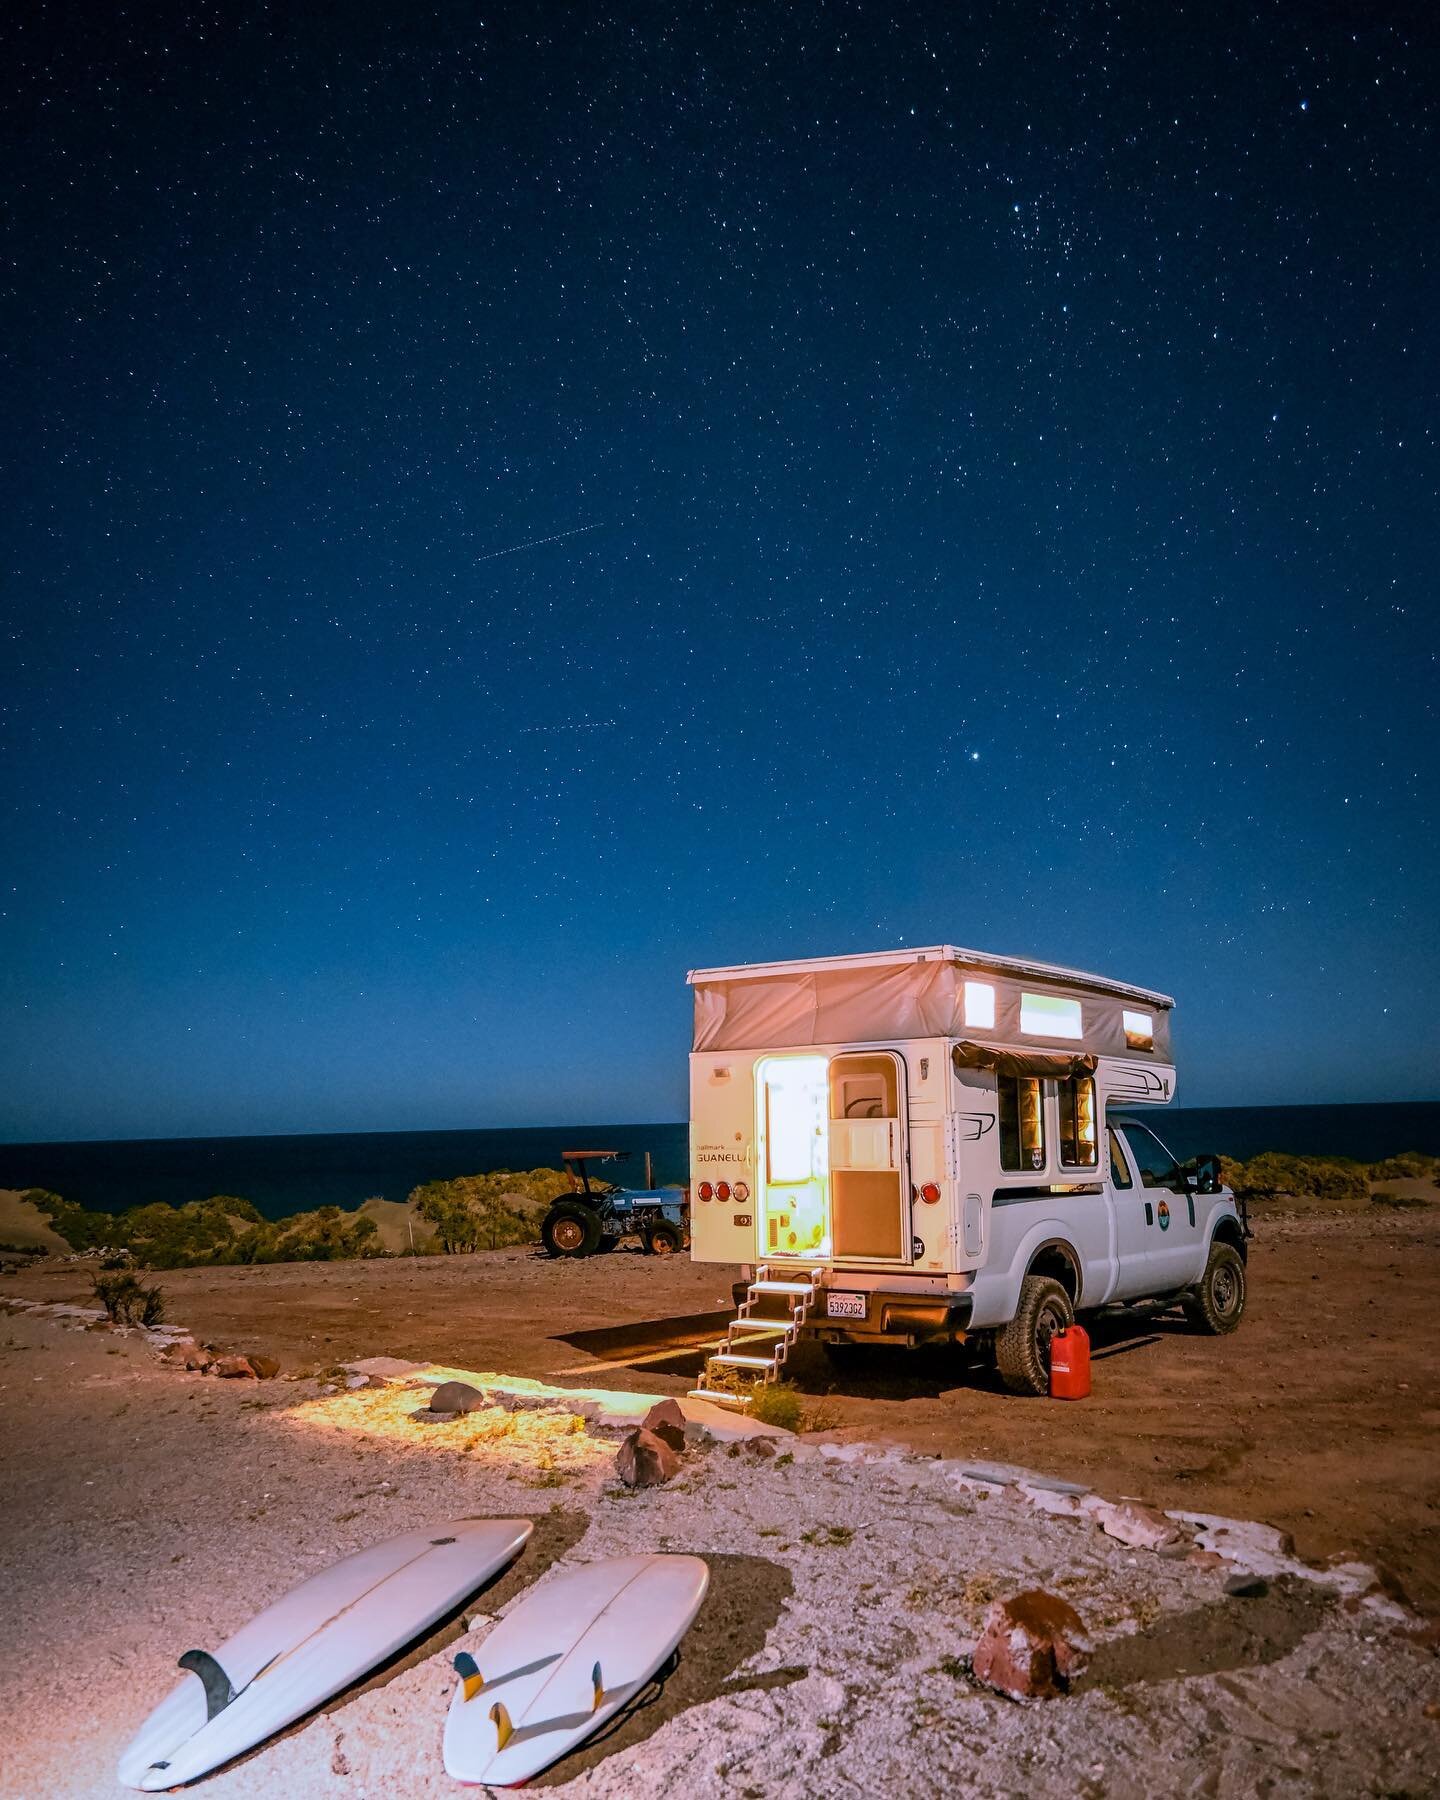 Taking an exploratory work trip through several of Baja California&rsquo;s eco-regions connecting with old friends, and visiting some of our favorite haunts. Here @natebphotos gave me a super informative run down on long exposure photography while ex